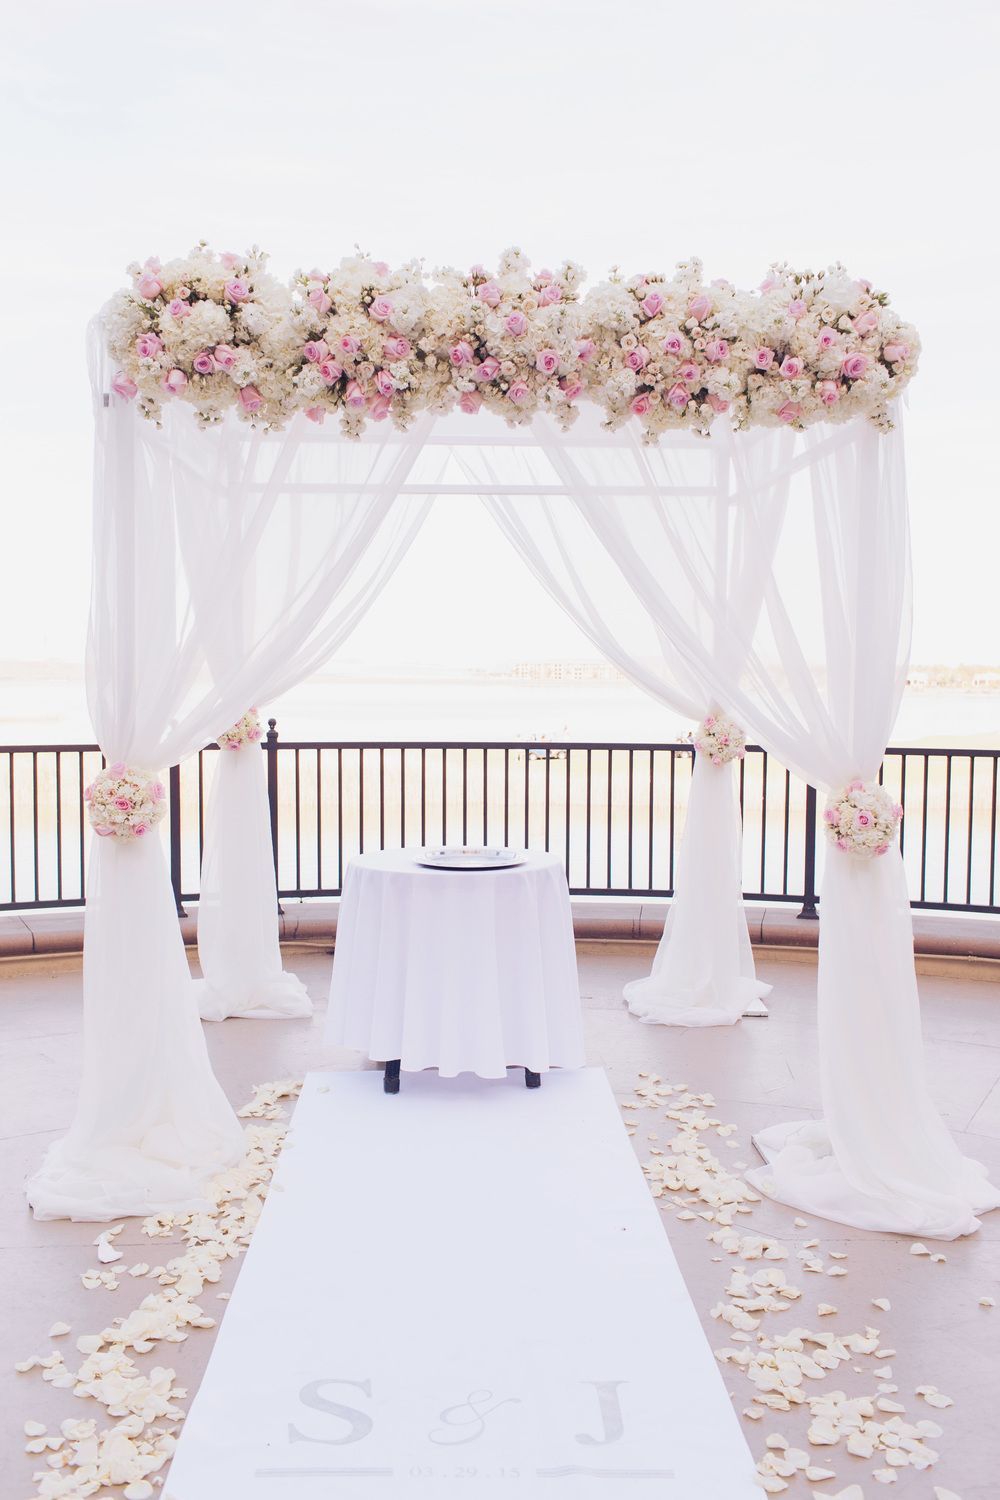 For the lakeside ceremony we dressed a chuppah in flowing ivory fabric topped with ivory and pale pink roses.  Matching topiaries